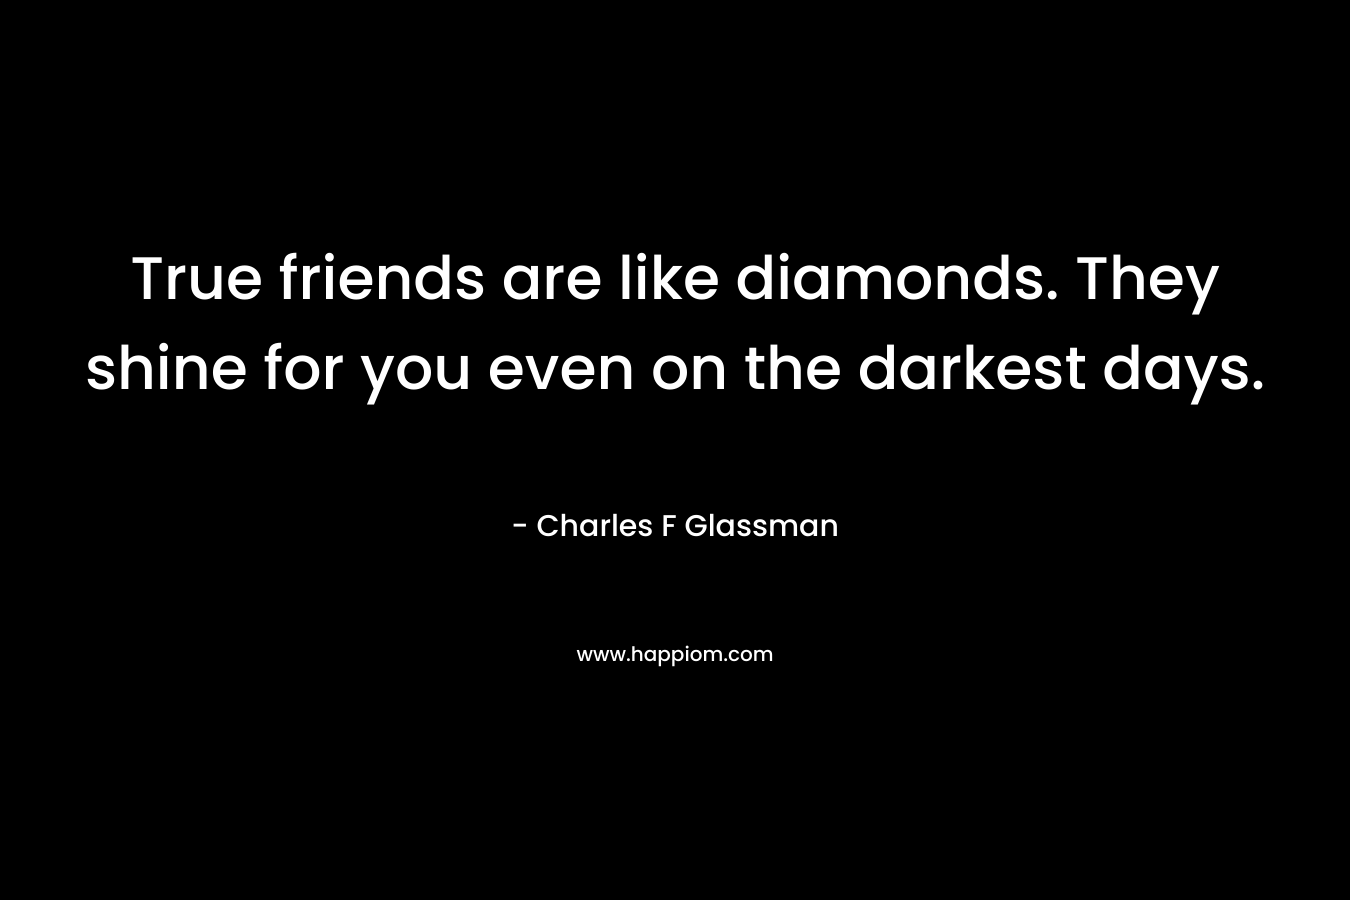 True friends are like diamonds. They shine for you even on the darkest days.